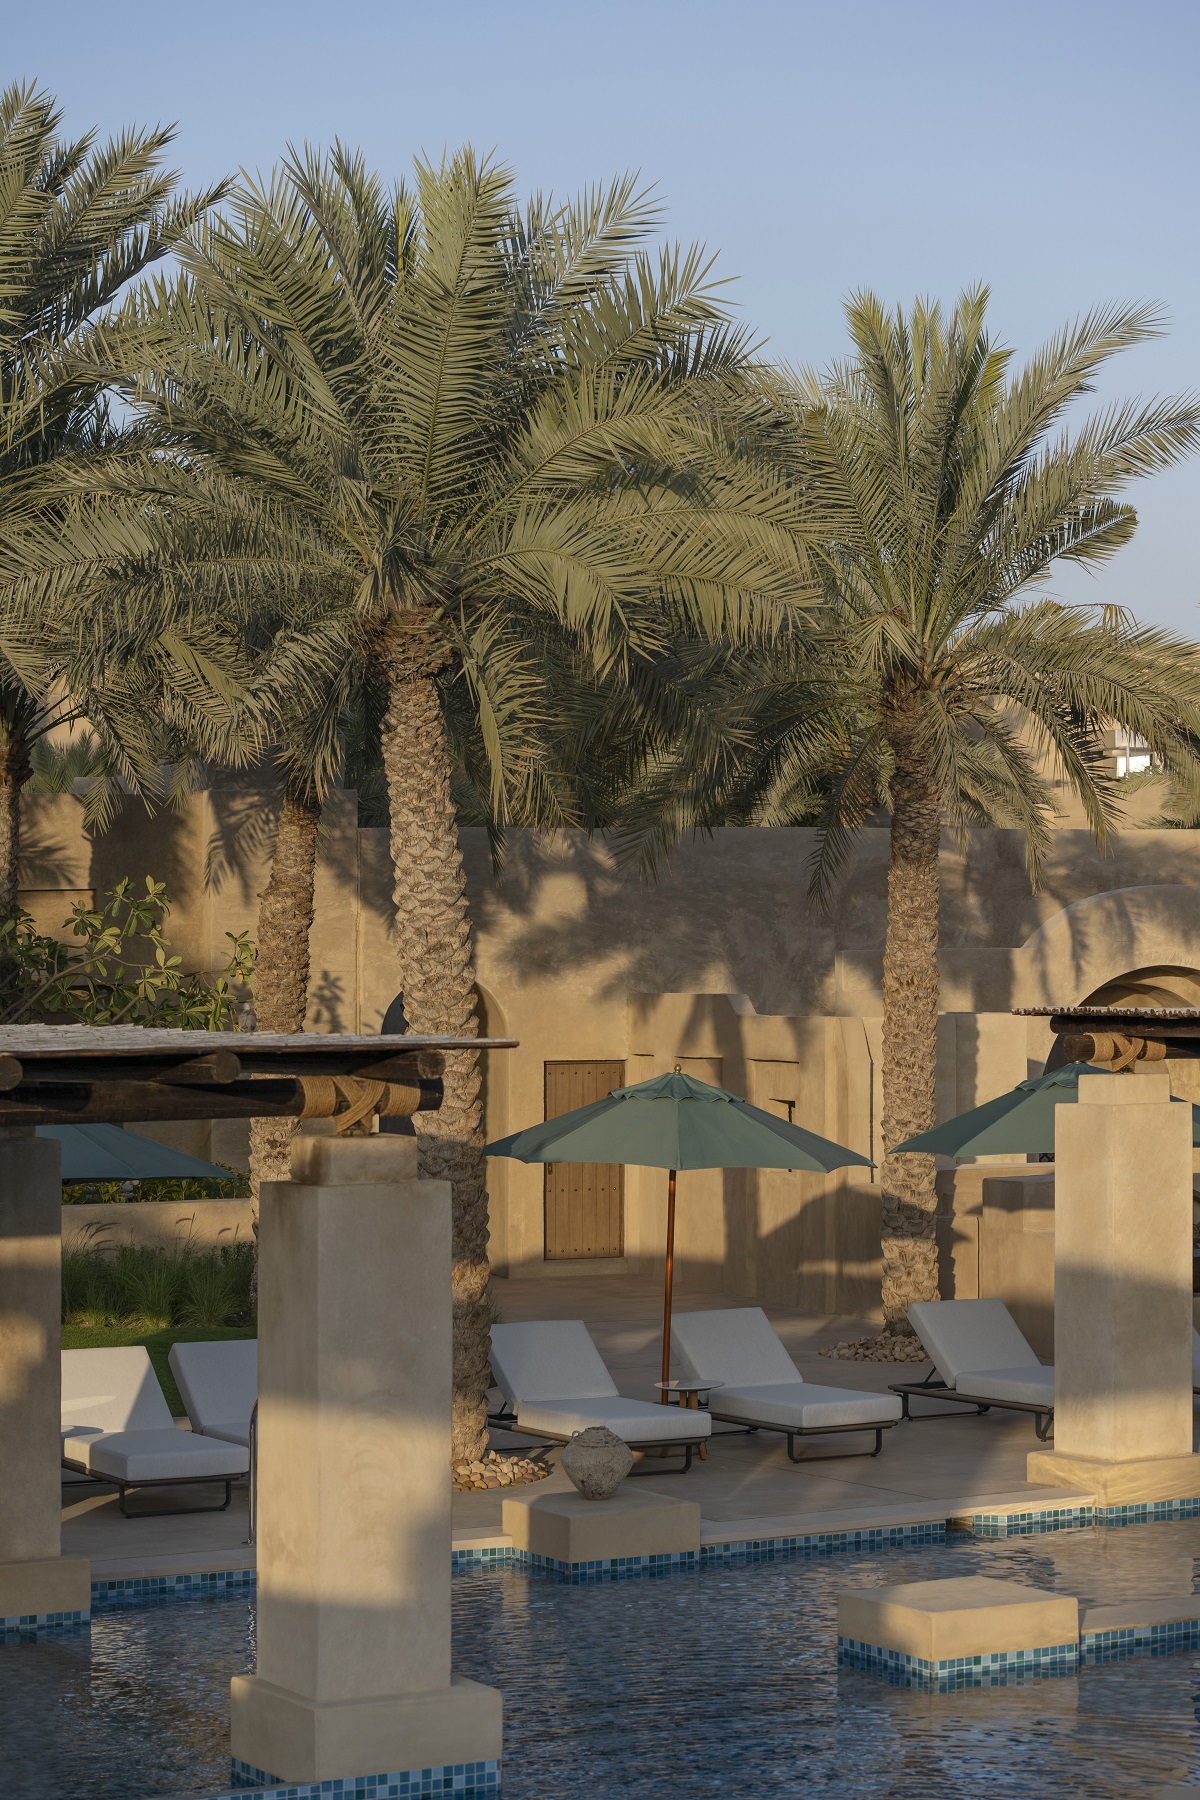 swimming pool surrounded by umbrellas, sun loungers and palm trees in a central courtyard of the hotel